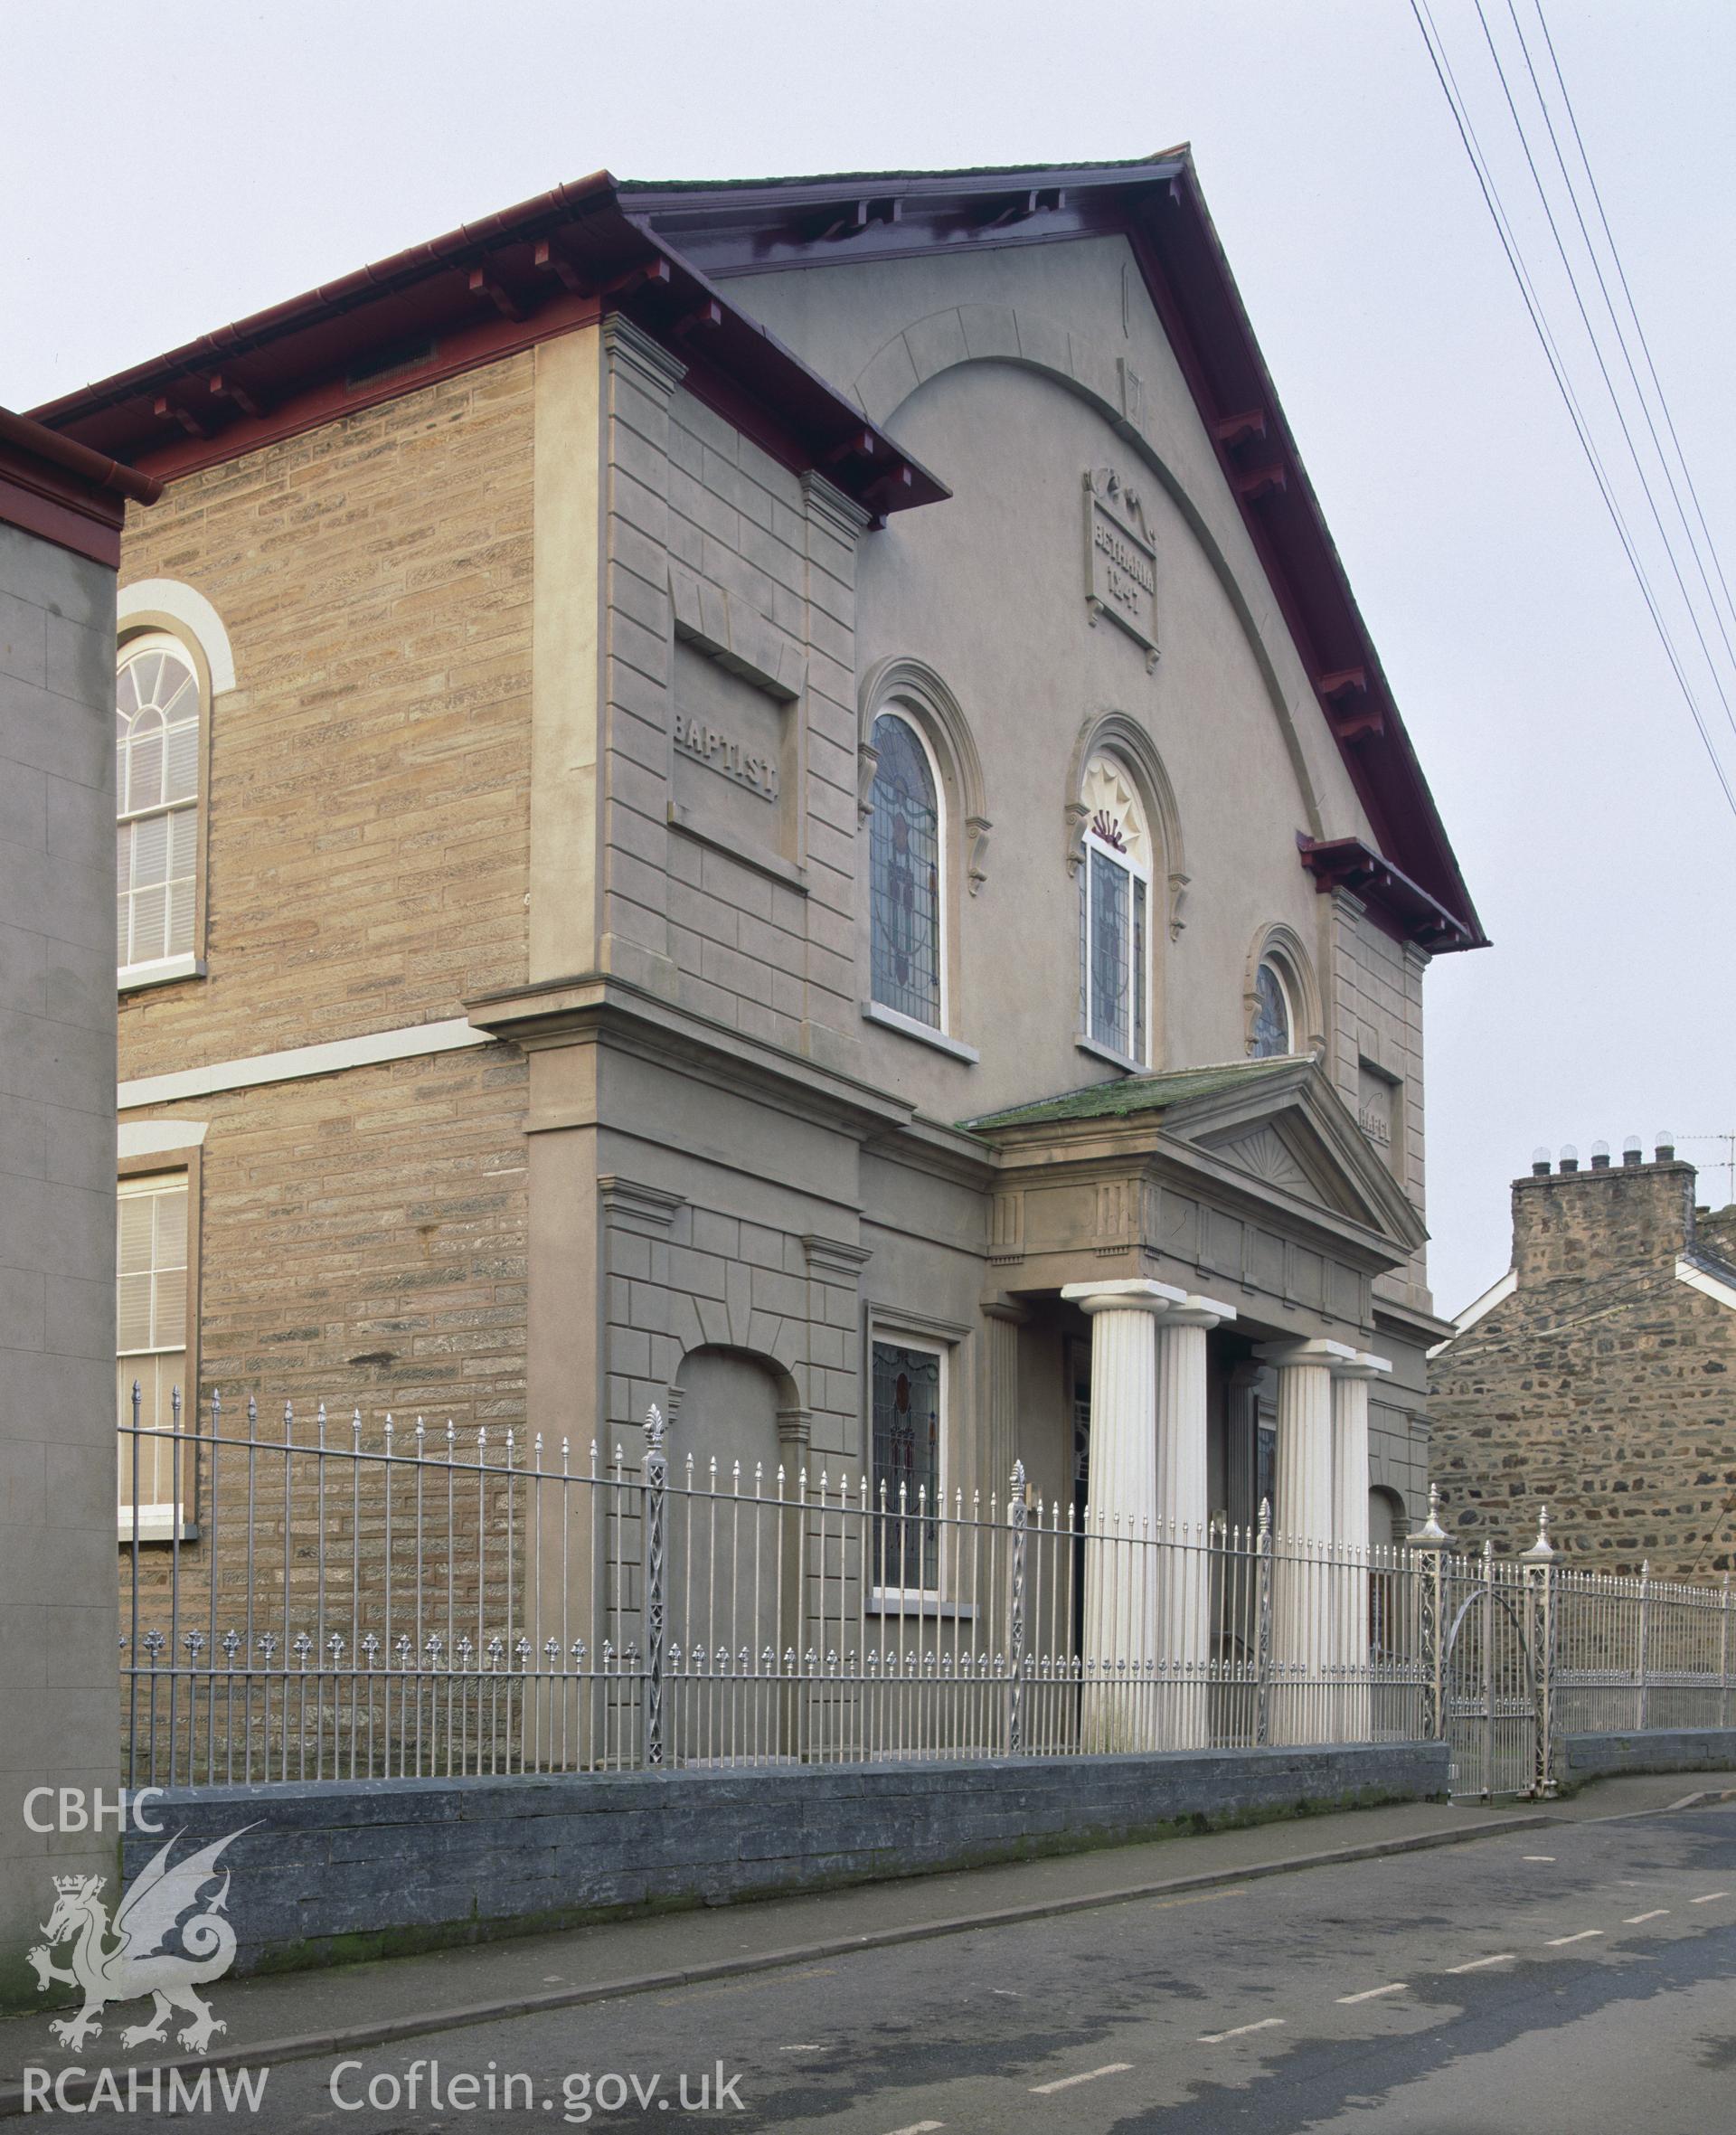 Colour transparency showing an exterior view of Bethania Baptist Chapel, Cardigan,  produced by Iain Wright, June 2004